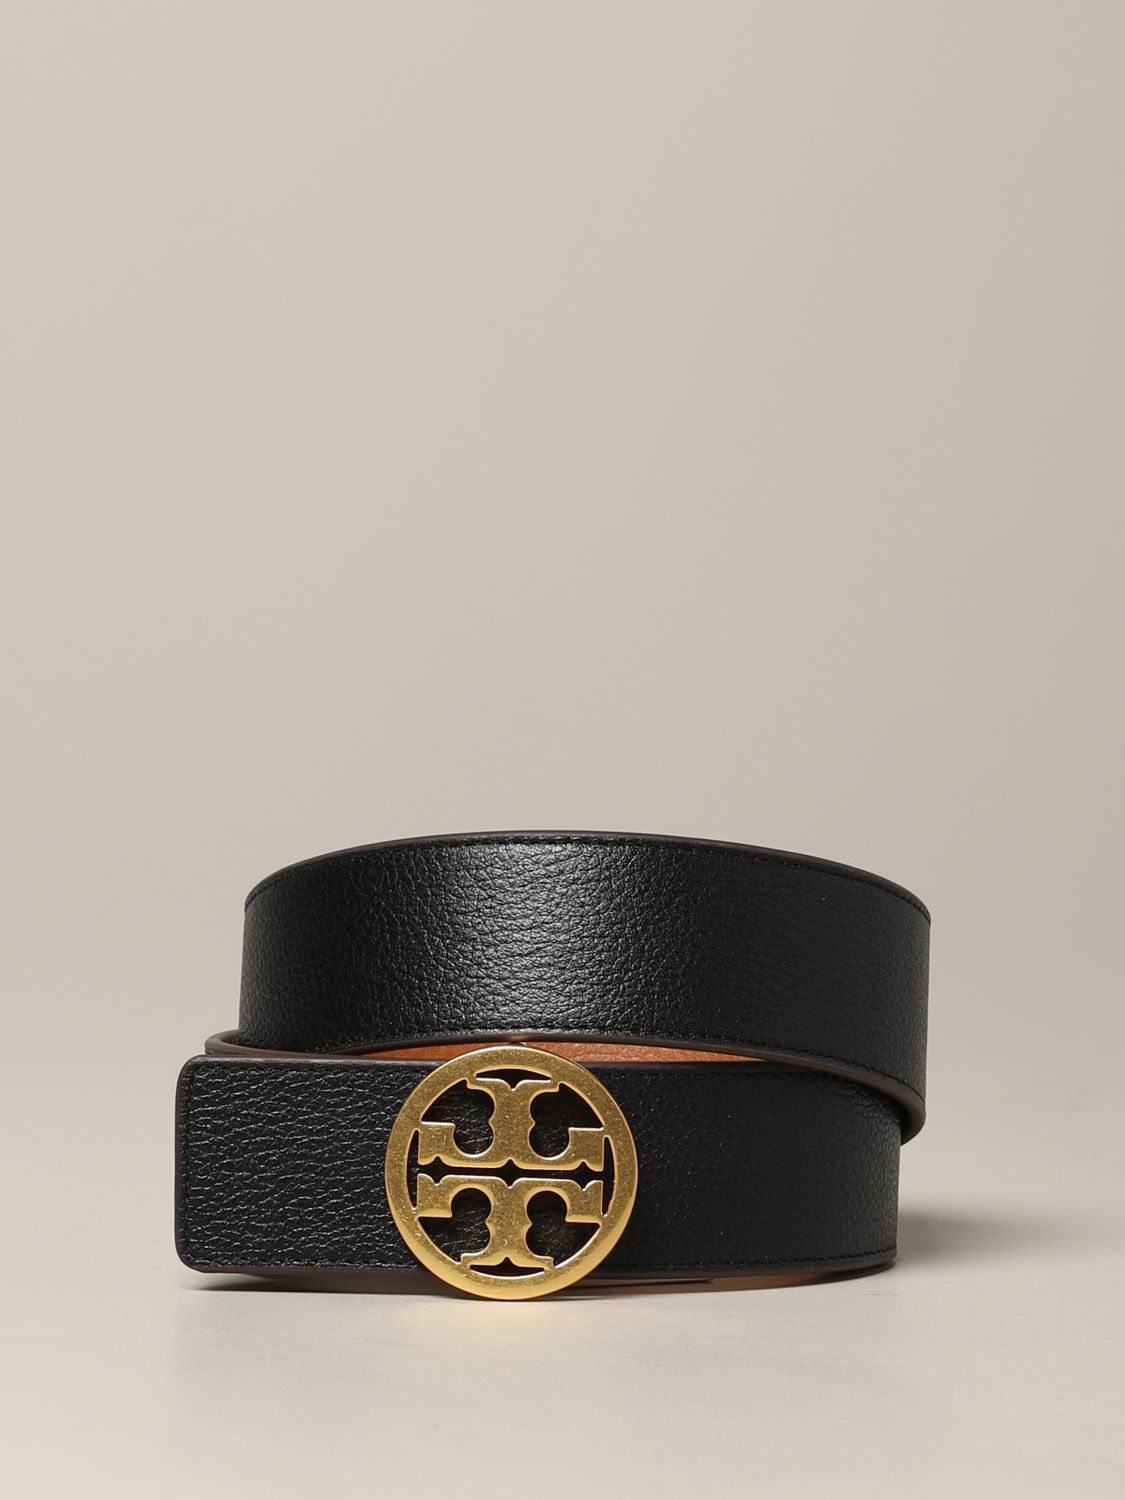 Tory burch outlet